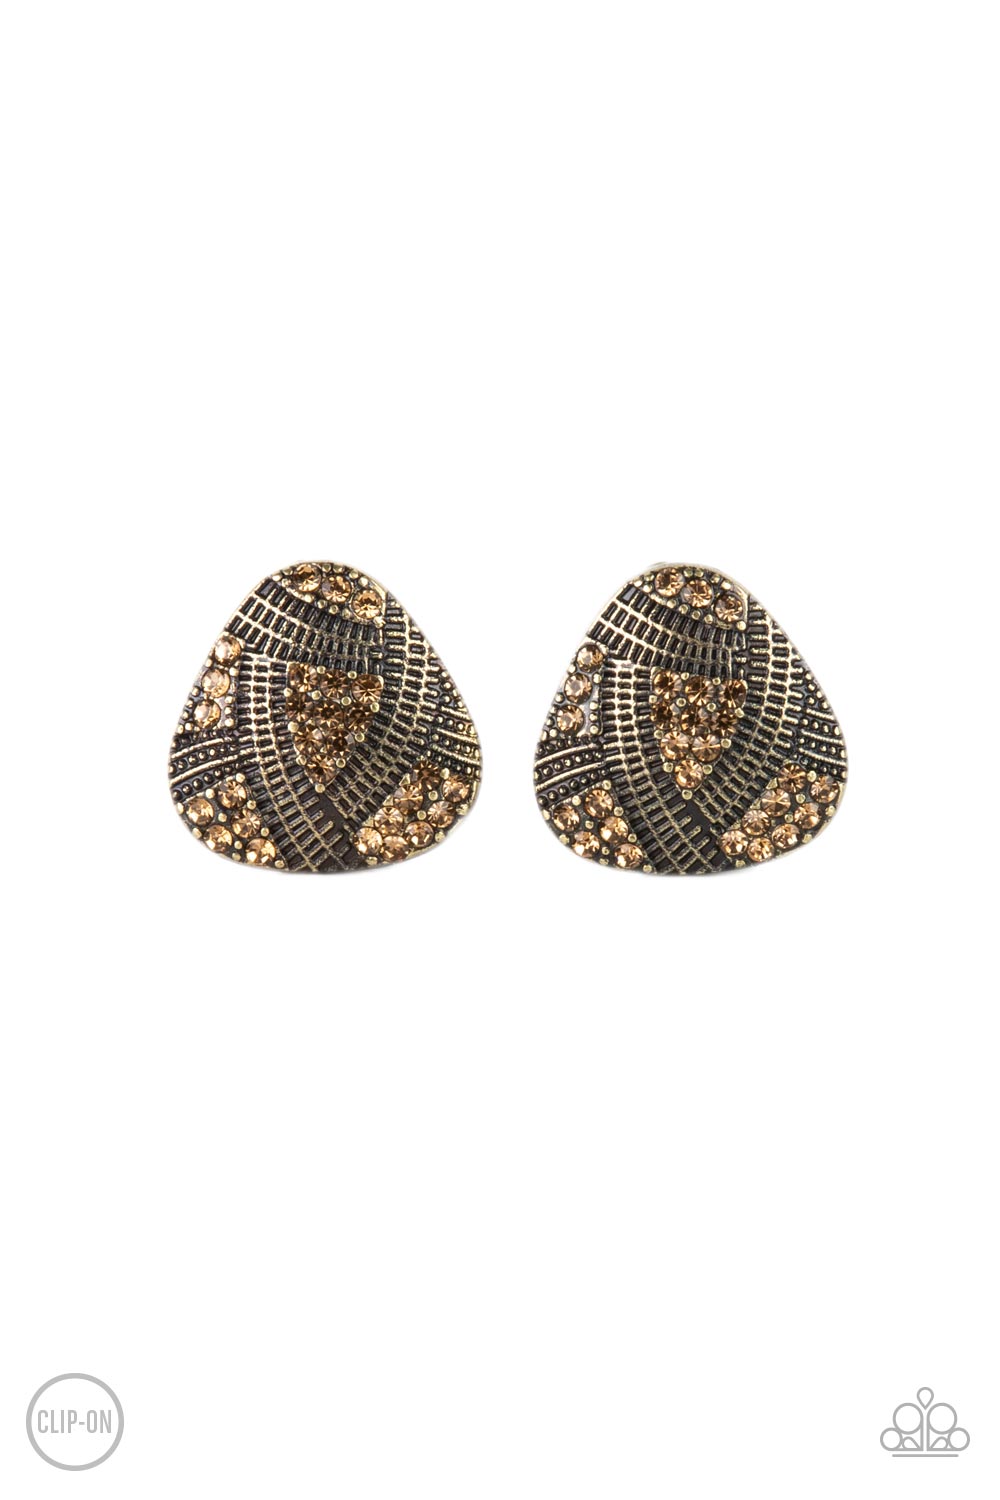 Gorgeously Galleria Brass Clip-On Earring - Paparazzi Accessories  Studded and textured ribbons of brass wrap around sections of golden topaz rhinestones, creating an edgy display. Earring attaches to a standard clip-on fitting.  ﻿All Paparazzi Accessories are lead free and nickel free!  Sold as one pair of clip-on earrings.